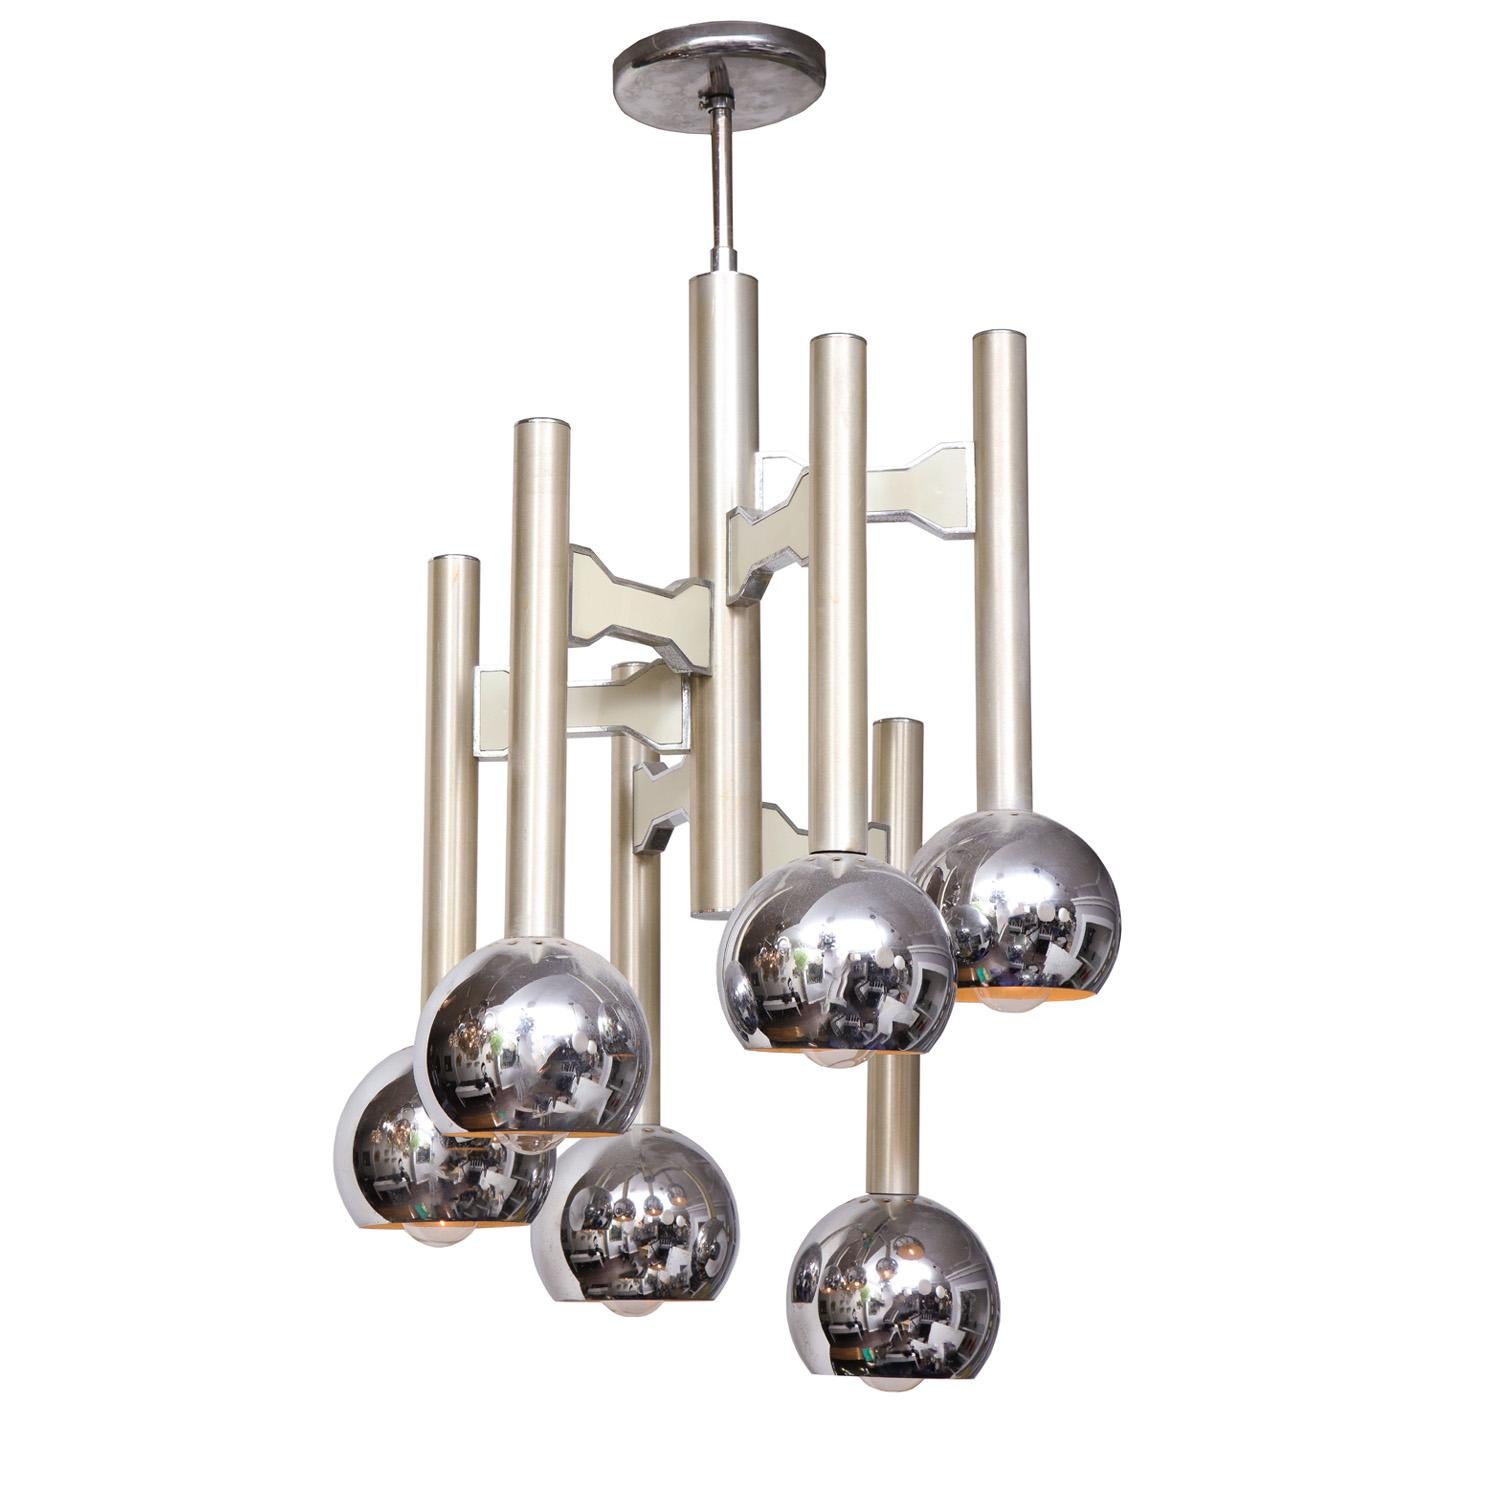 Stylish brushed nickel pendant fixture with chrome ball shades and canopy in the manner of Sciolari. Italy 1970's.